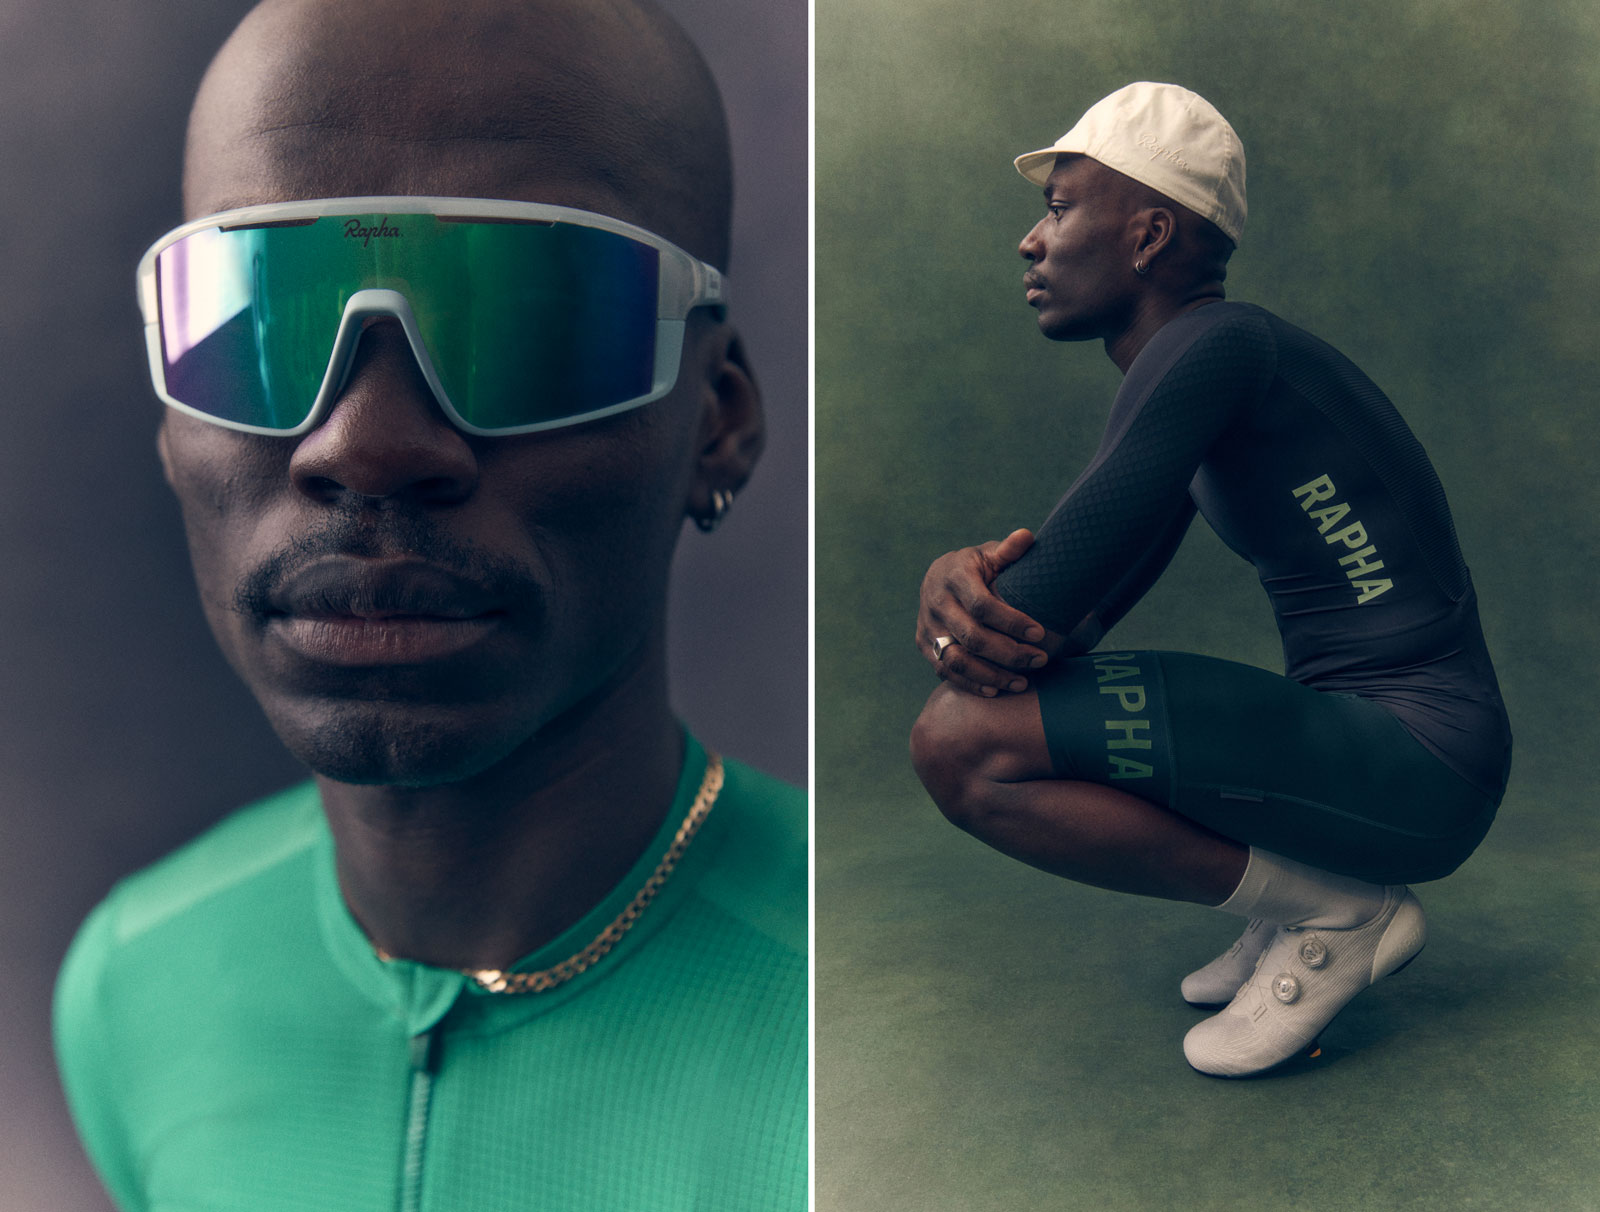 The Rapha Pro Team Full Frame Glasses get a matching tint to complete the look